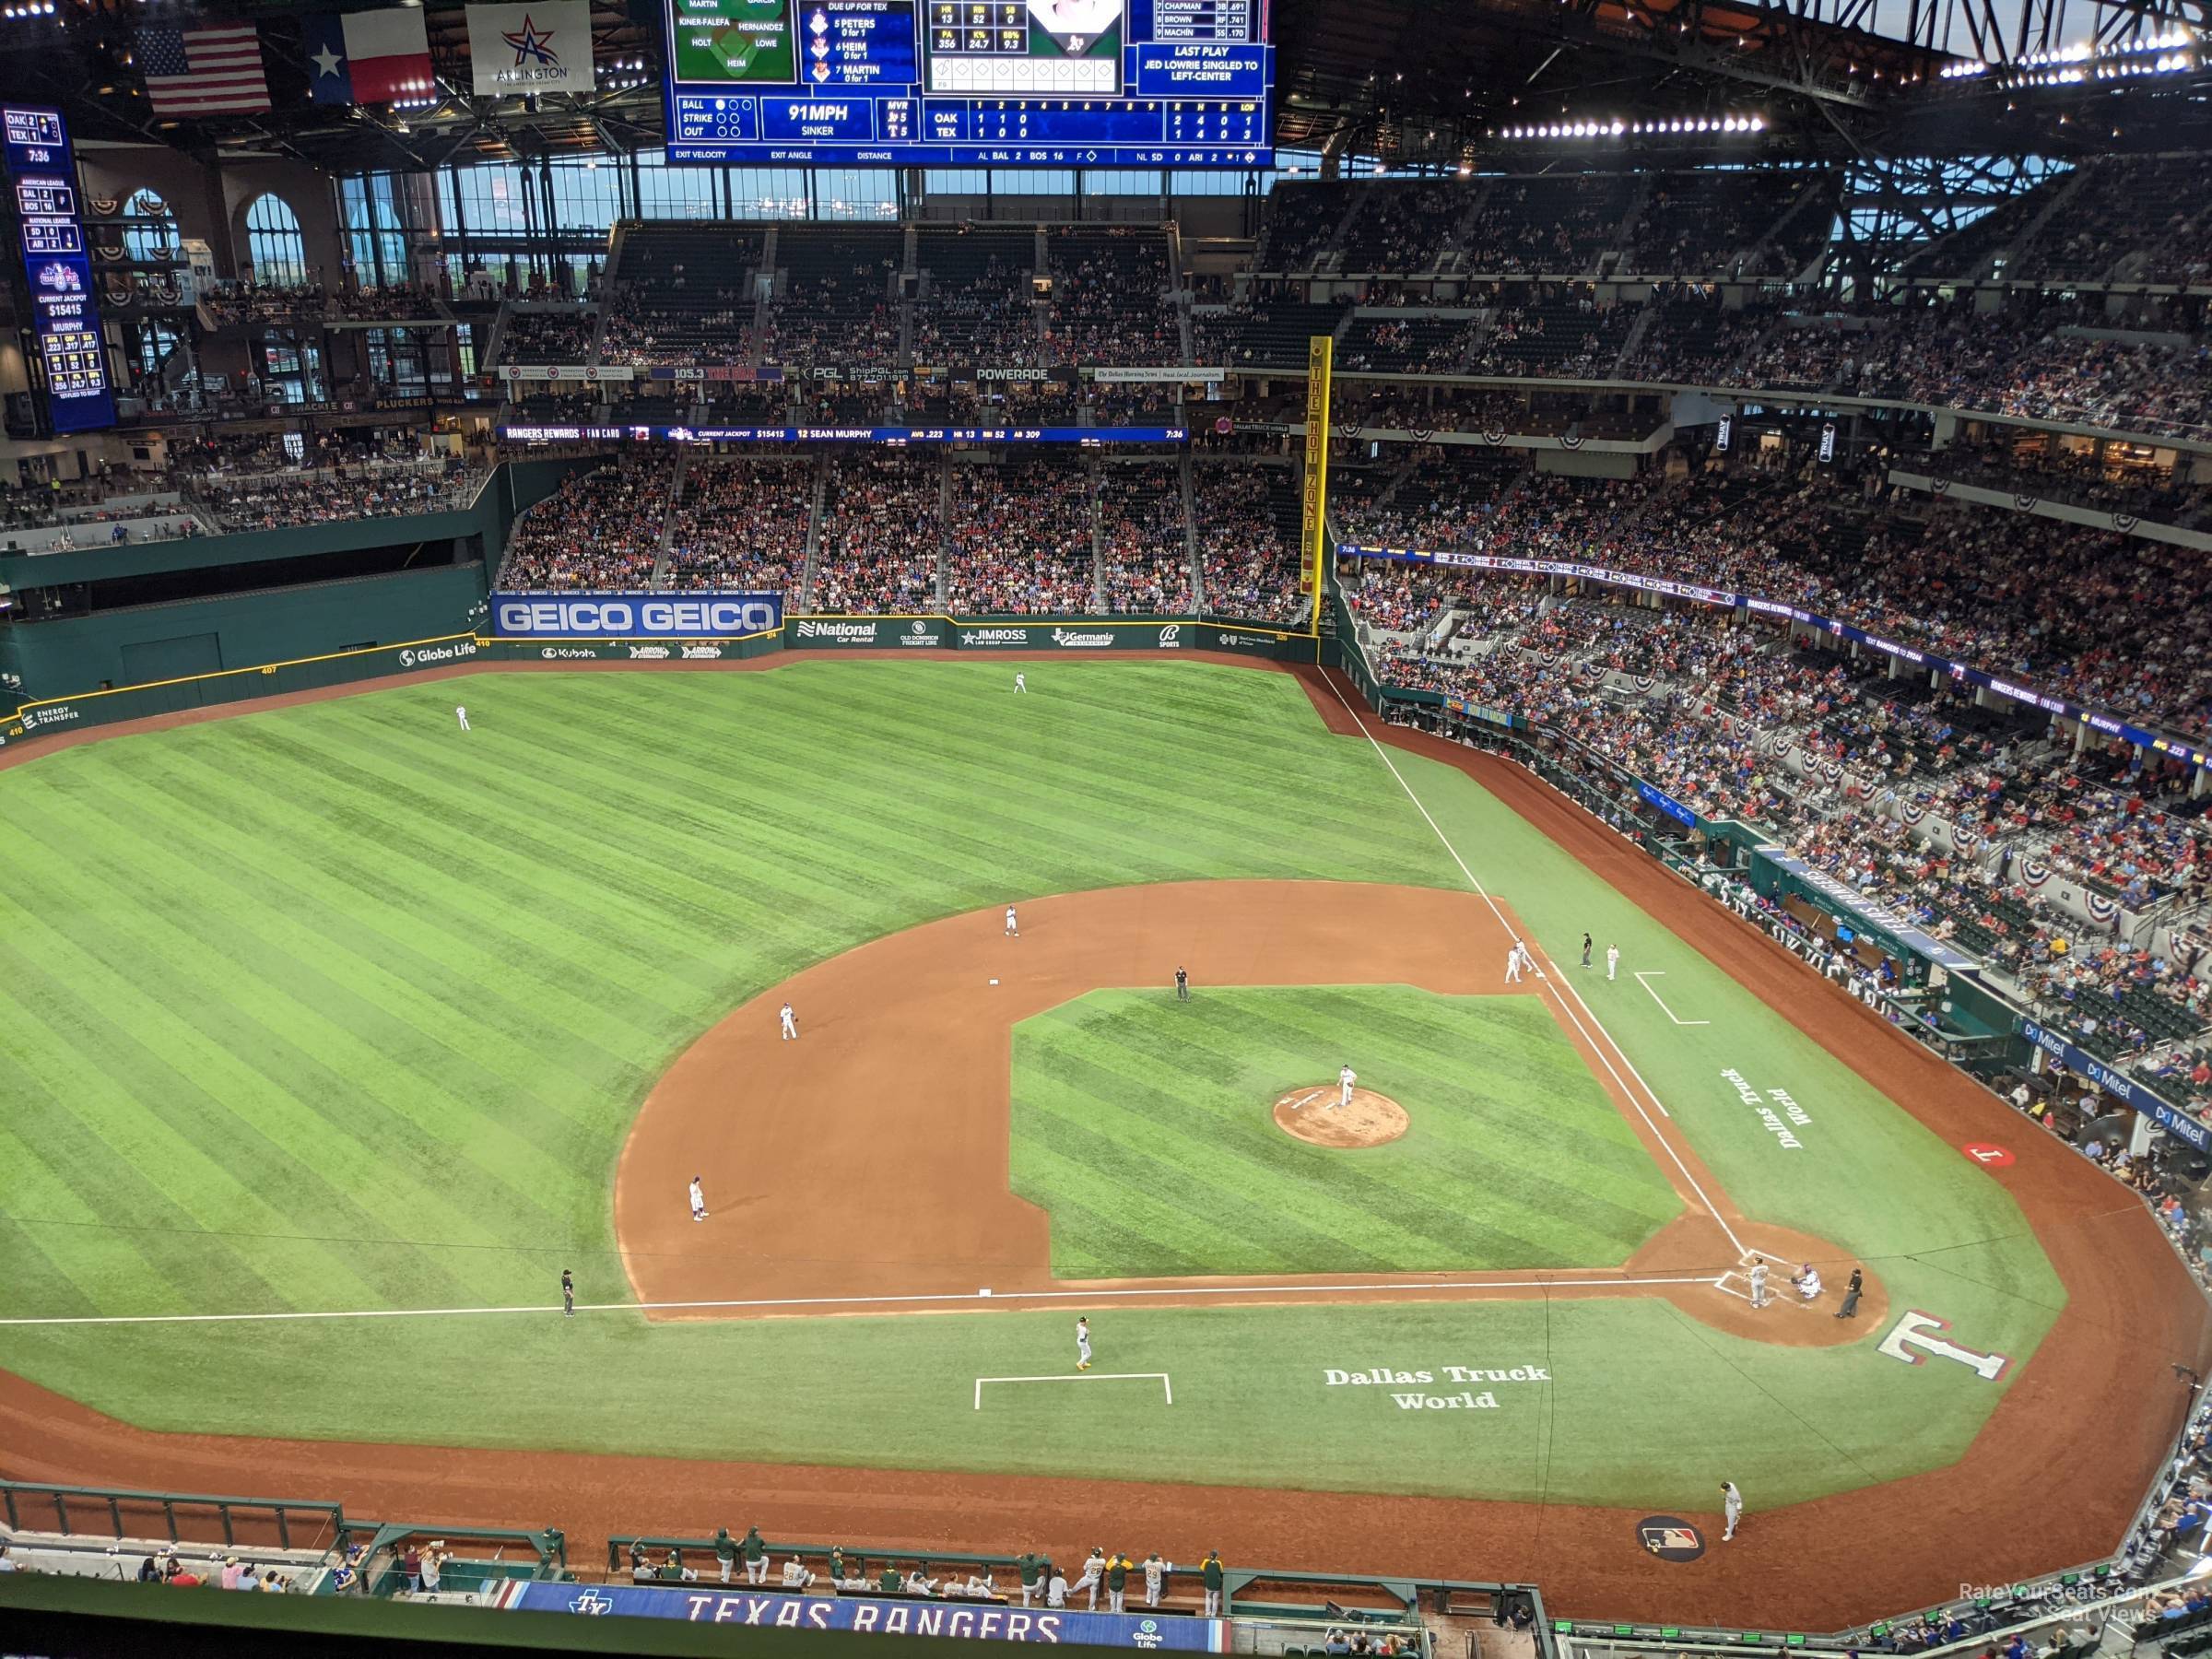 Section 307 at Globe Life Field 